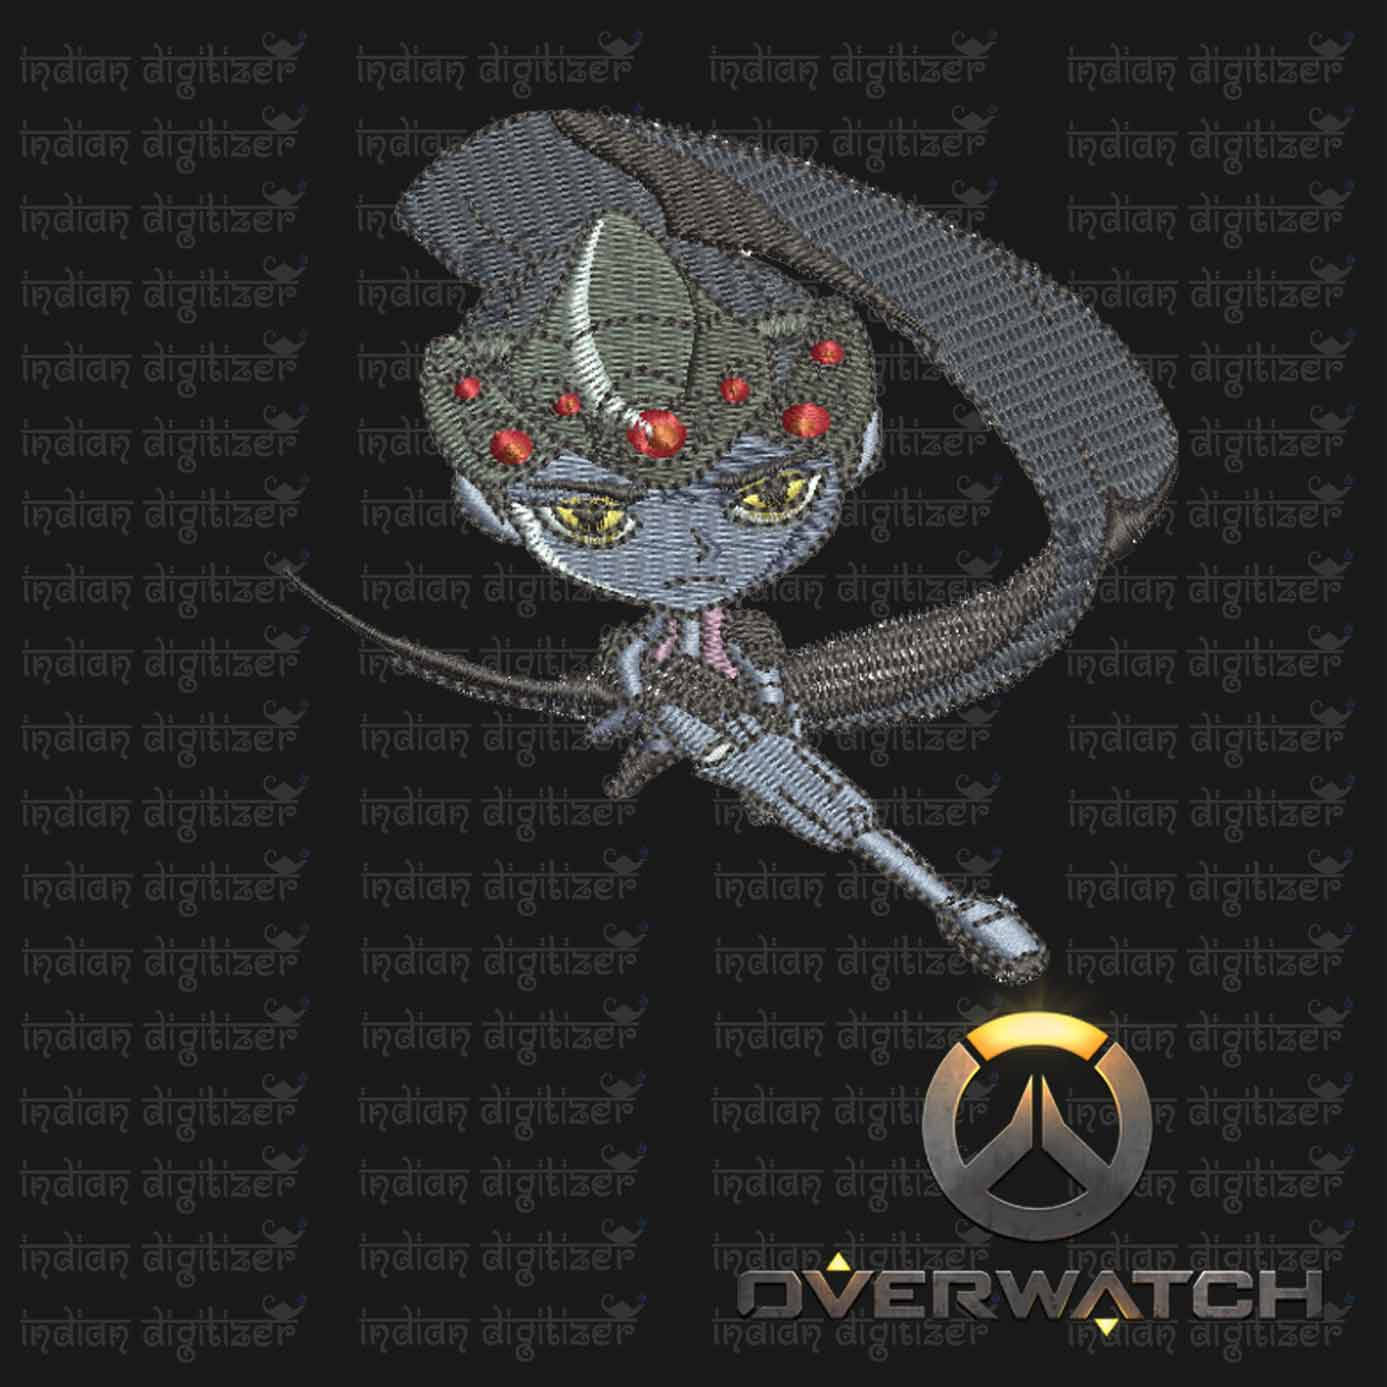 Overwatch Embroidery Designs - Widow Maker individual character for 4x4in hoop - resizable with freely downloadable software.